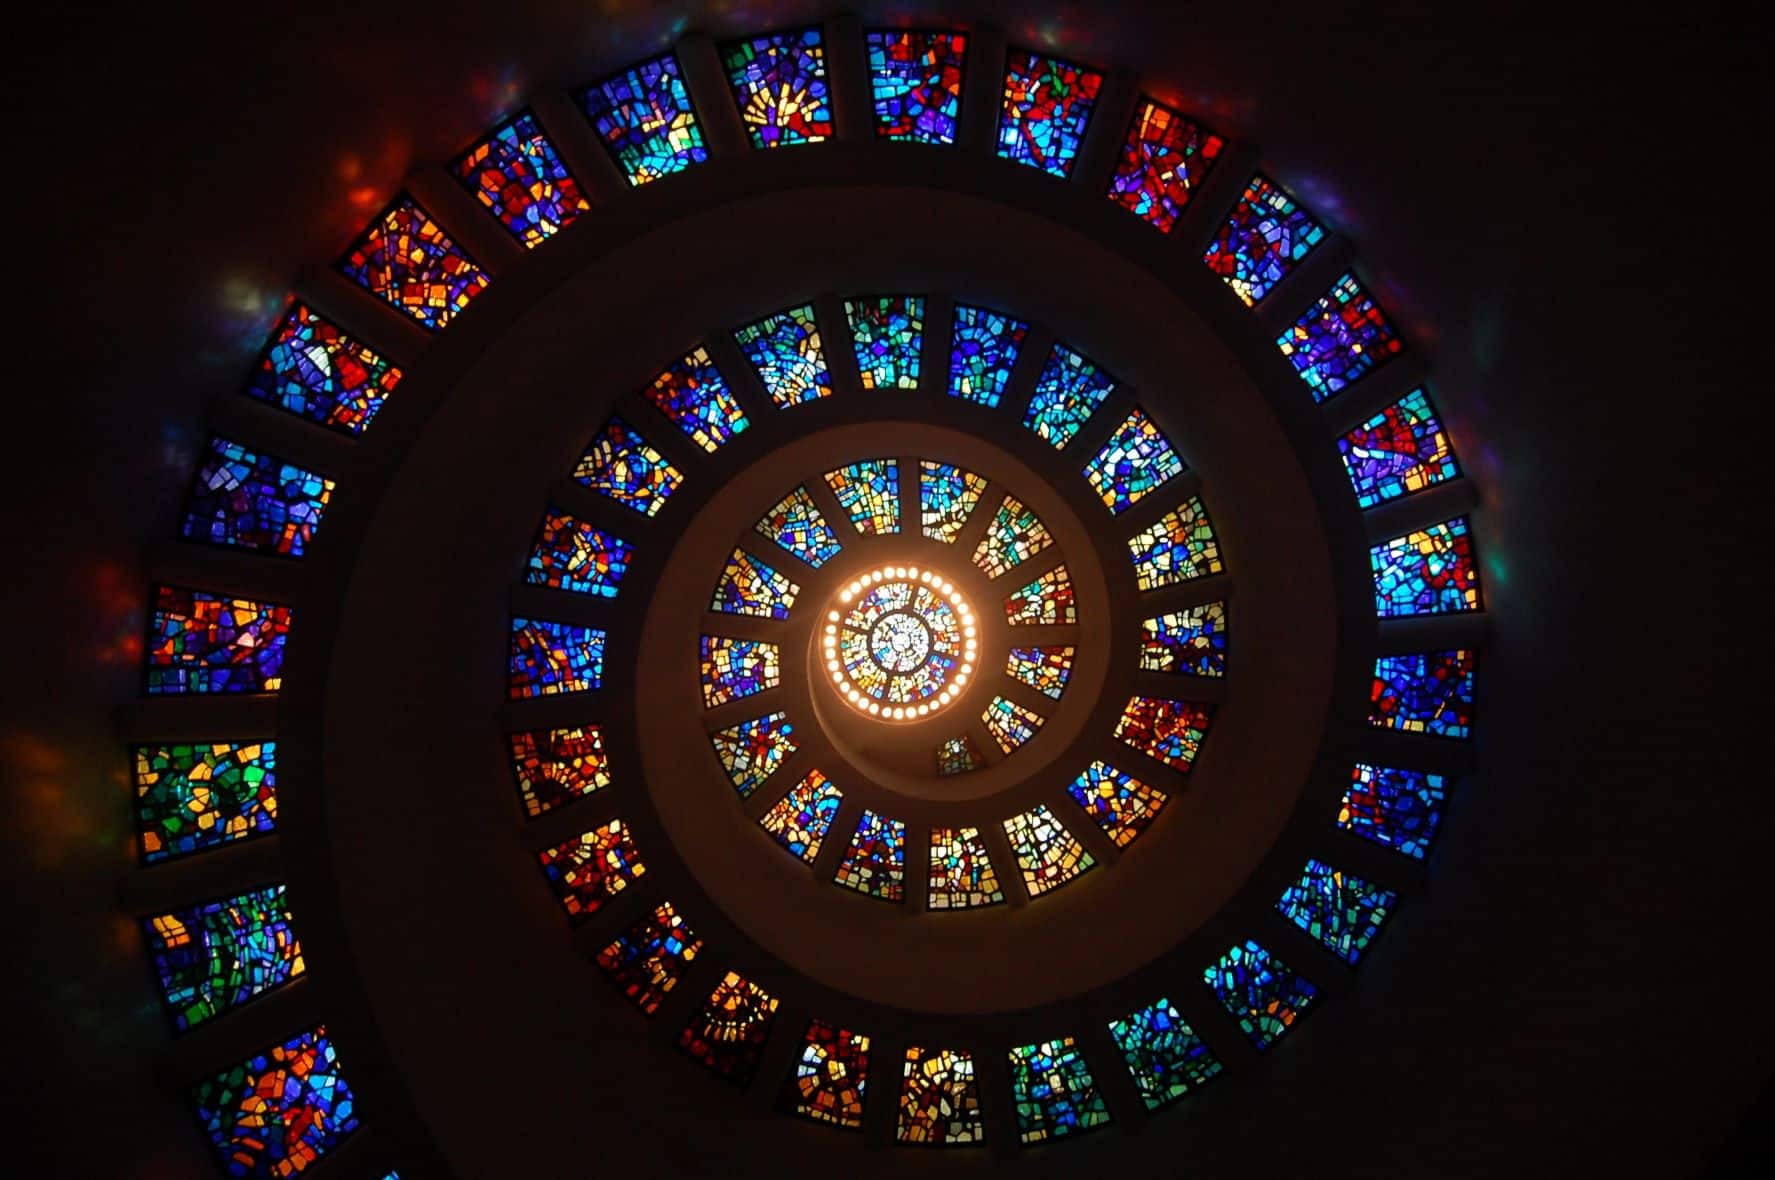 spiral of stained glass windows